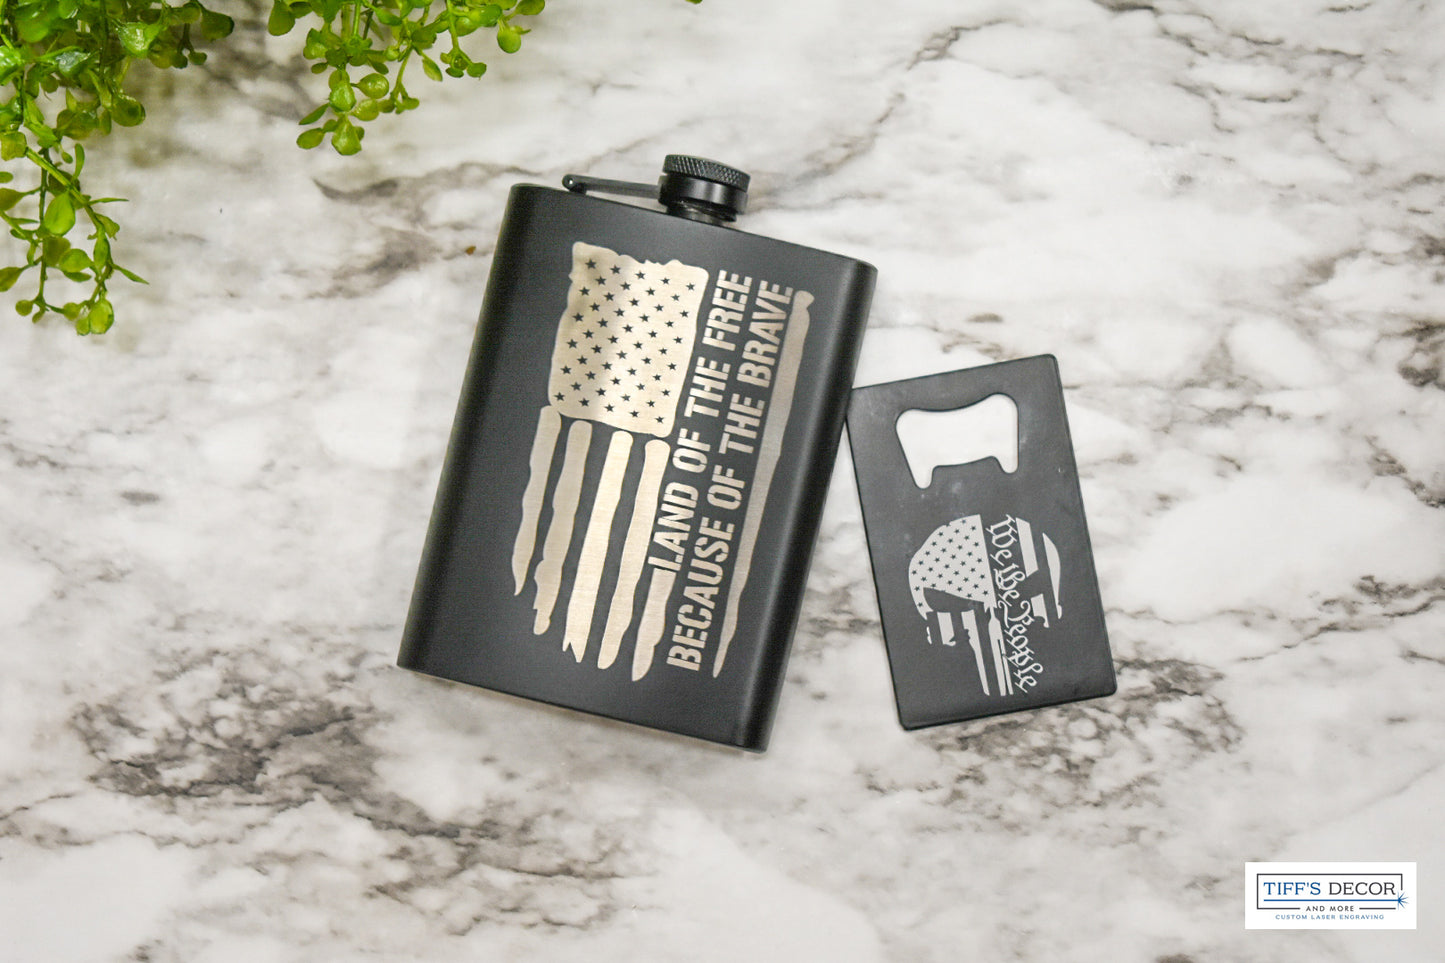 Powder coated stainless steel flask